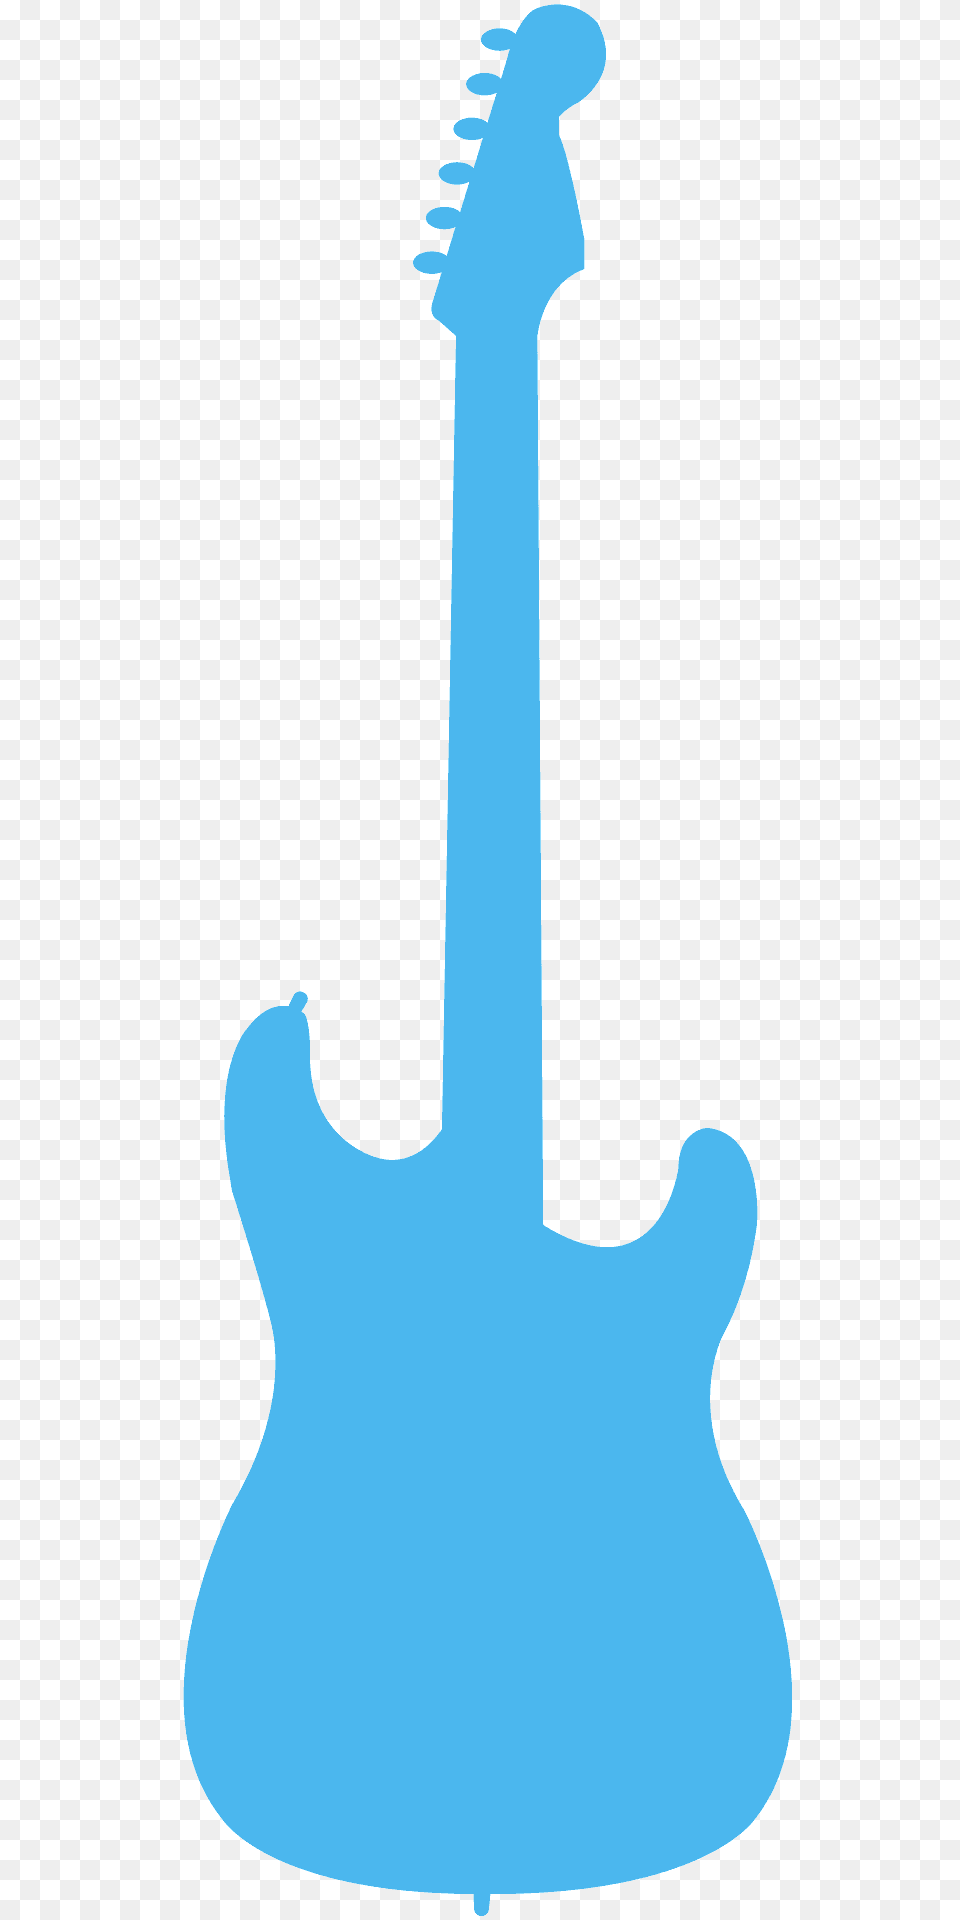 Electric Guitar Silhouette, Musical Instrument, Bass Guitar Png